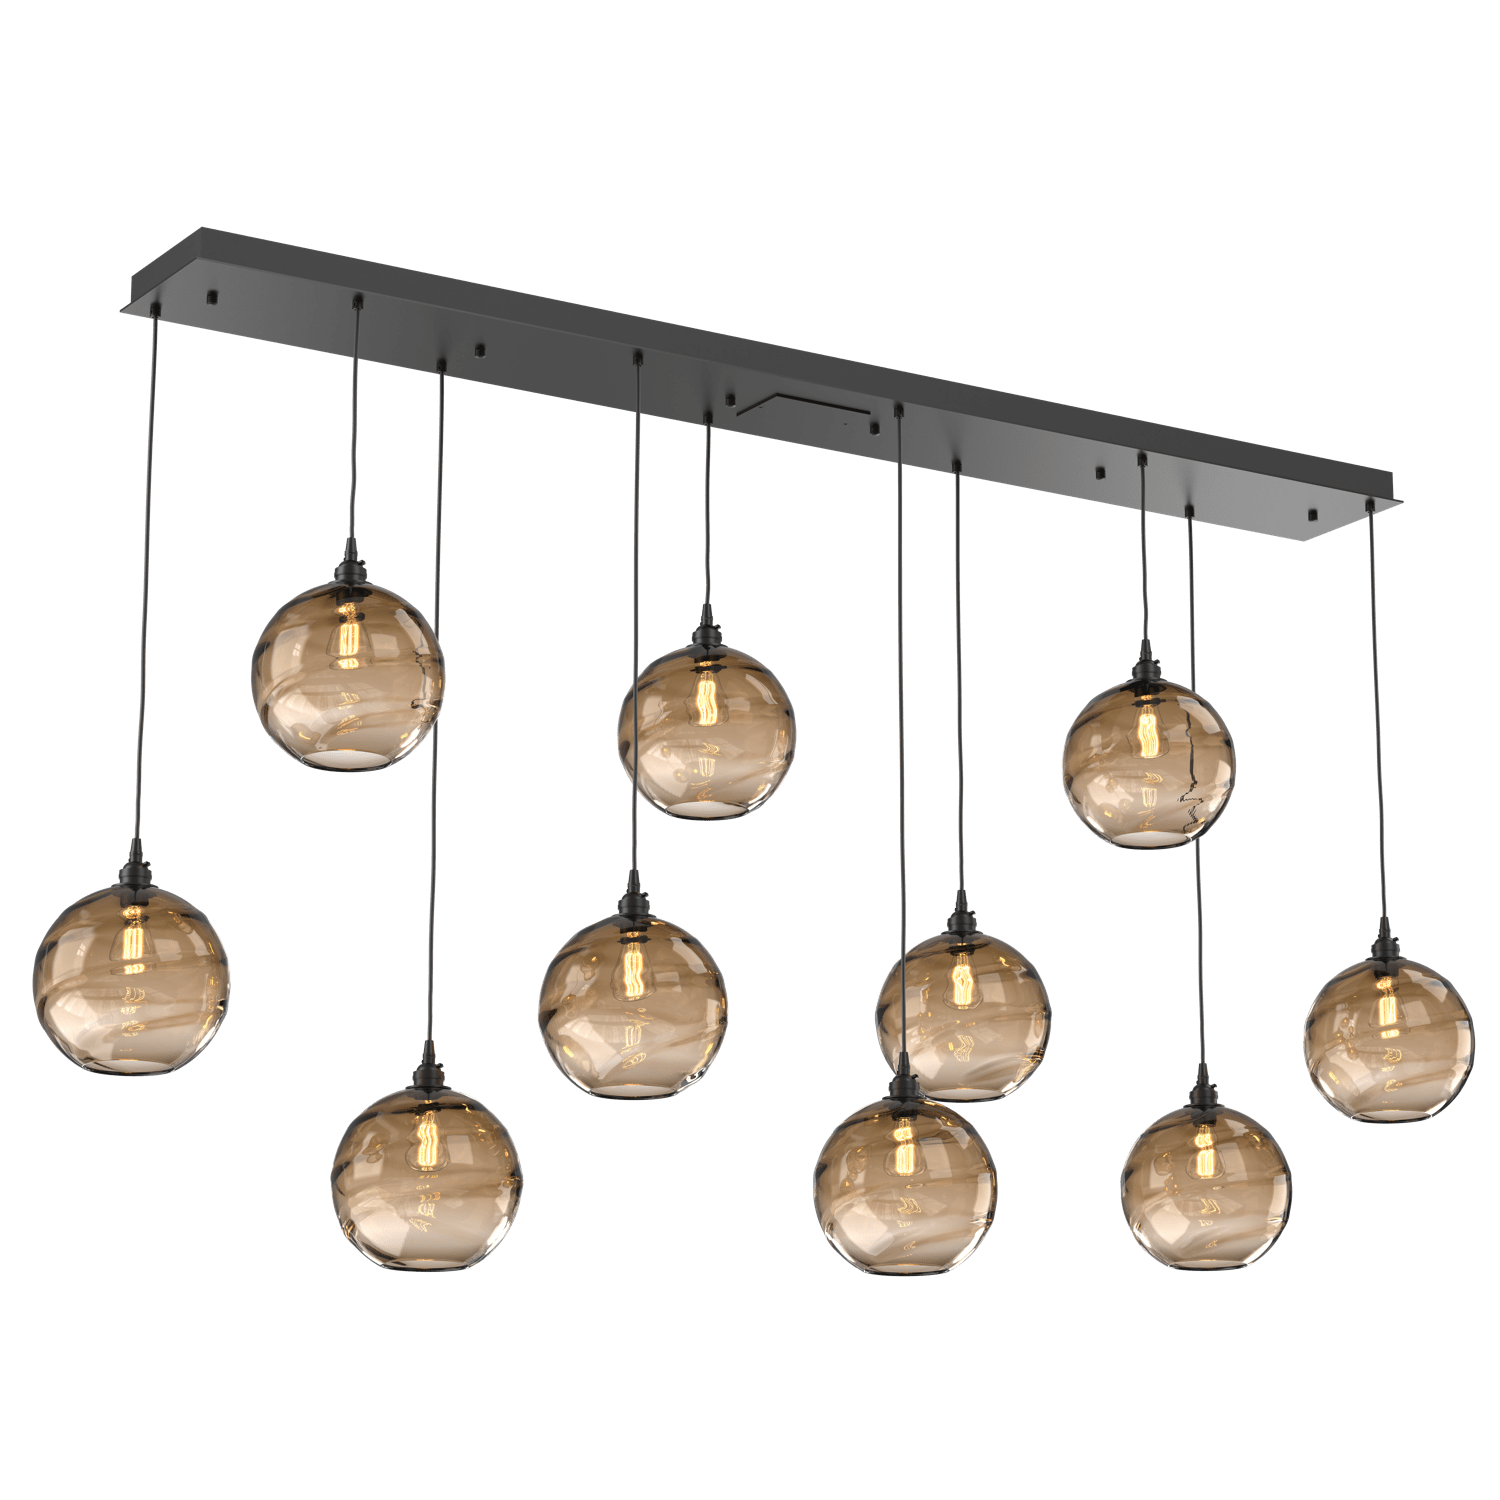 PLB0047-10-MB-OB-Hammerton-Studio-Optic-Blown-Glass-Terra-10-light-linear-pendant-chandelier-with-matte-black-finish-and-optic-bronze-blown-glass-shades-and-incandescent-lamping